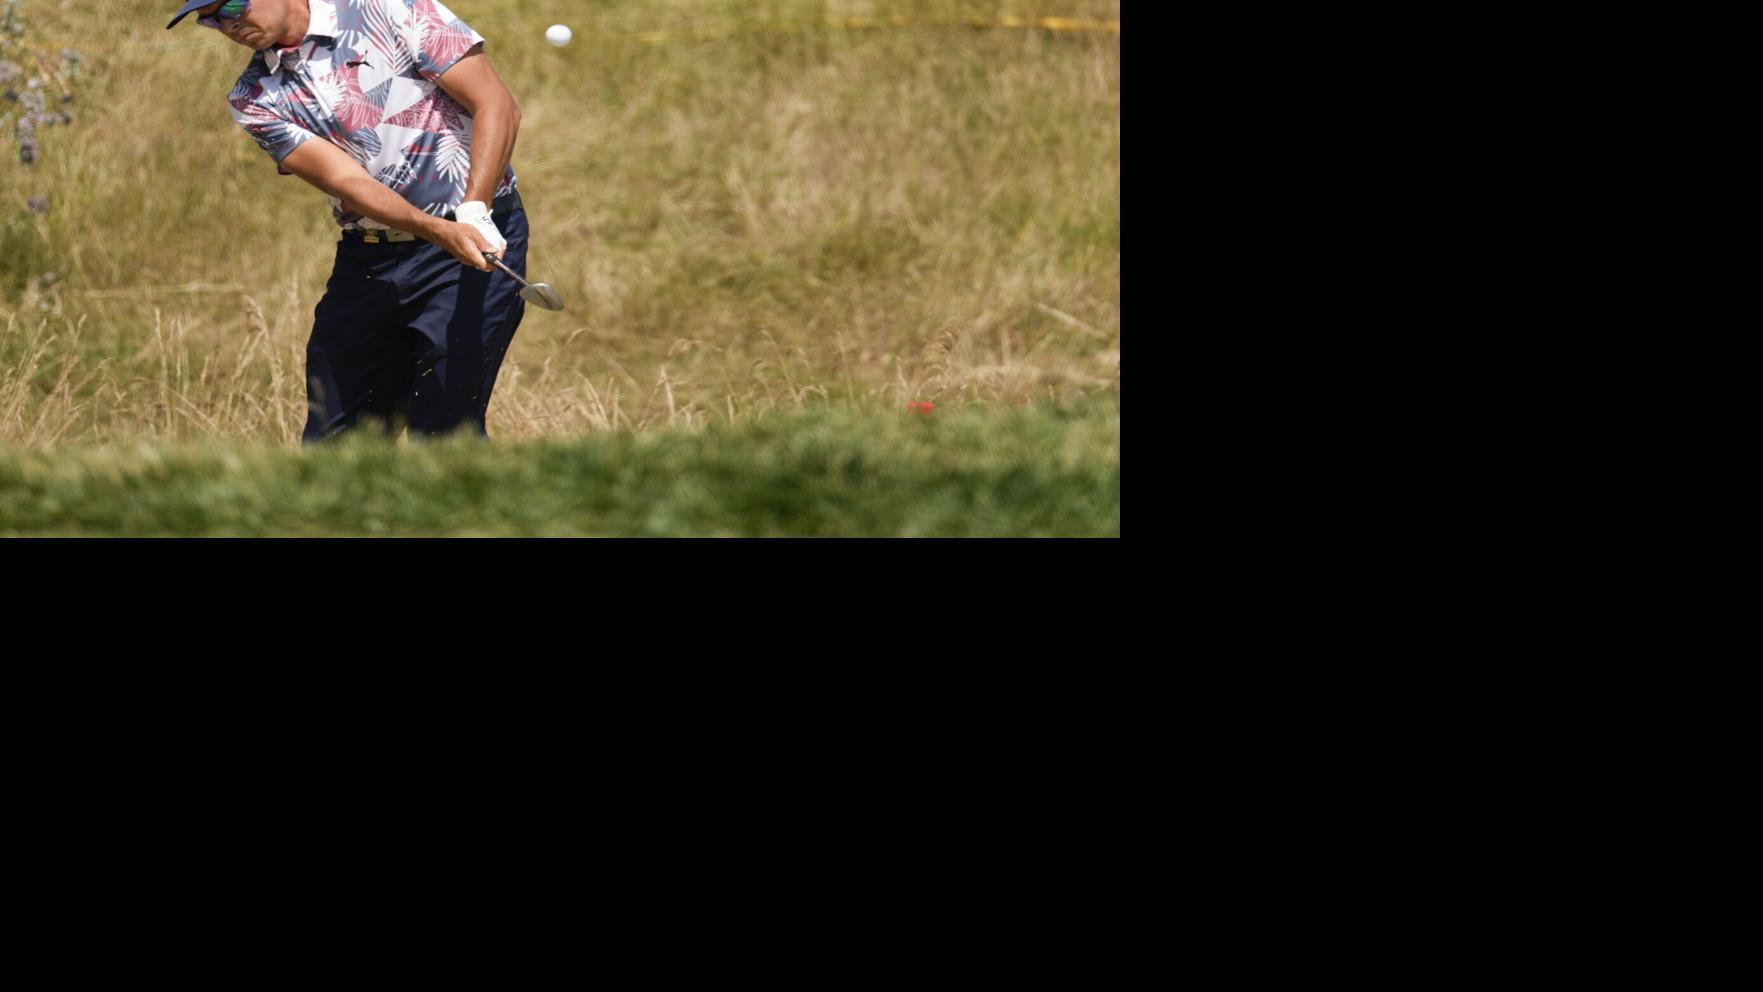 Rickie Fowler’s wild ride gives him 1-shot lead in US Open